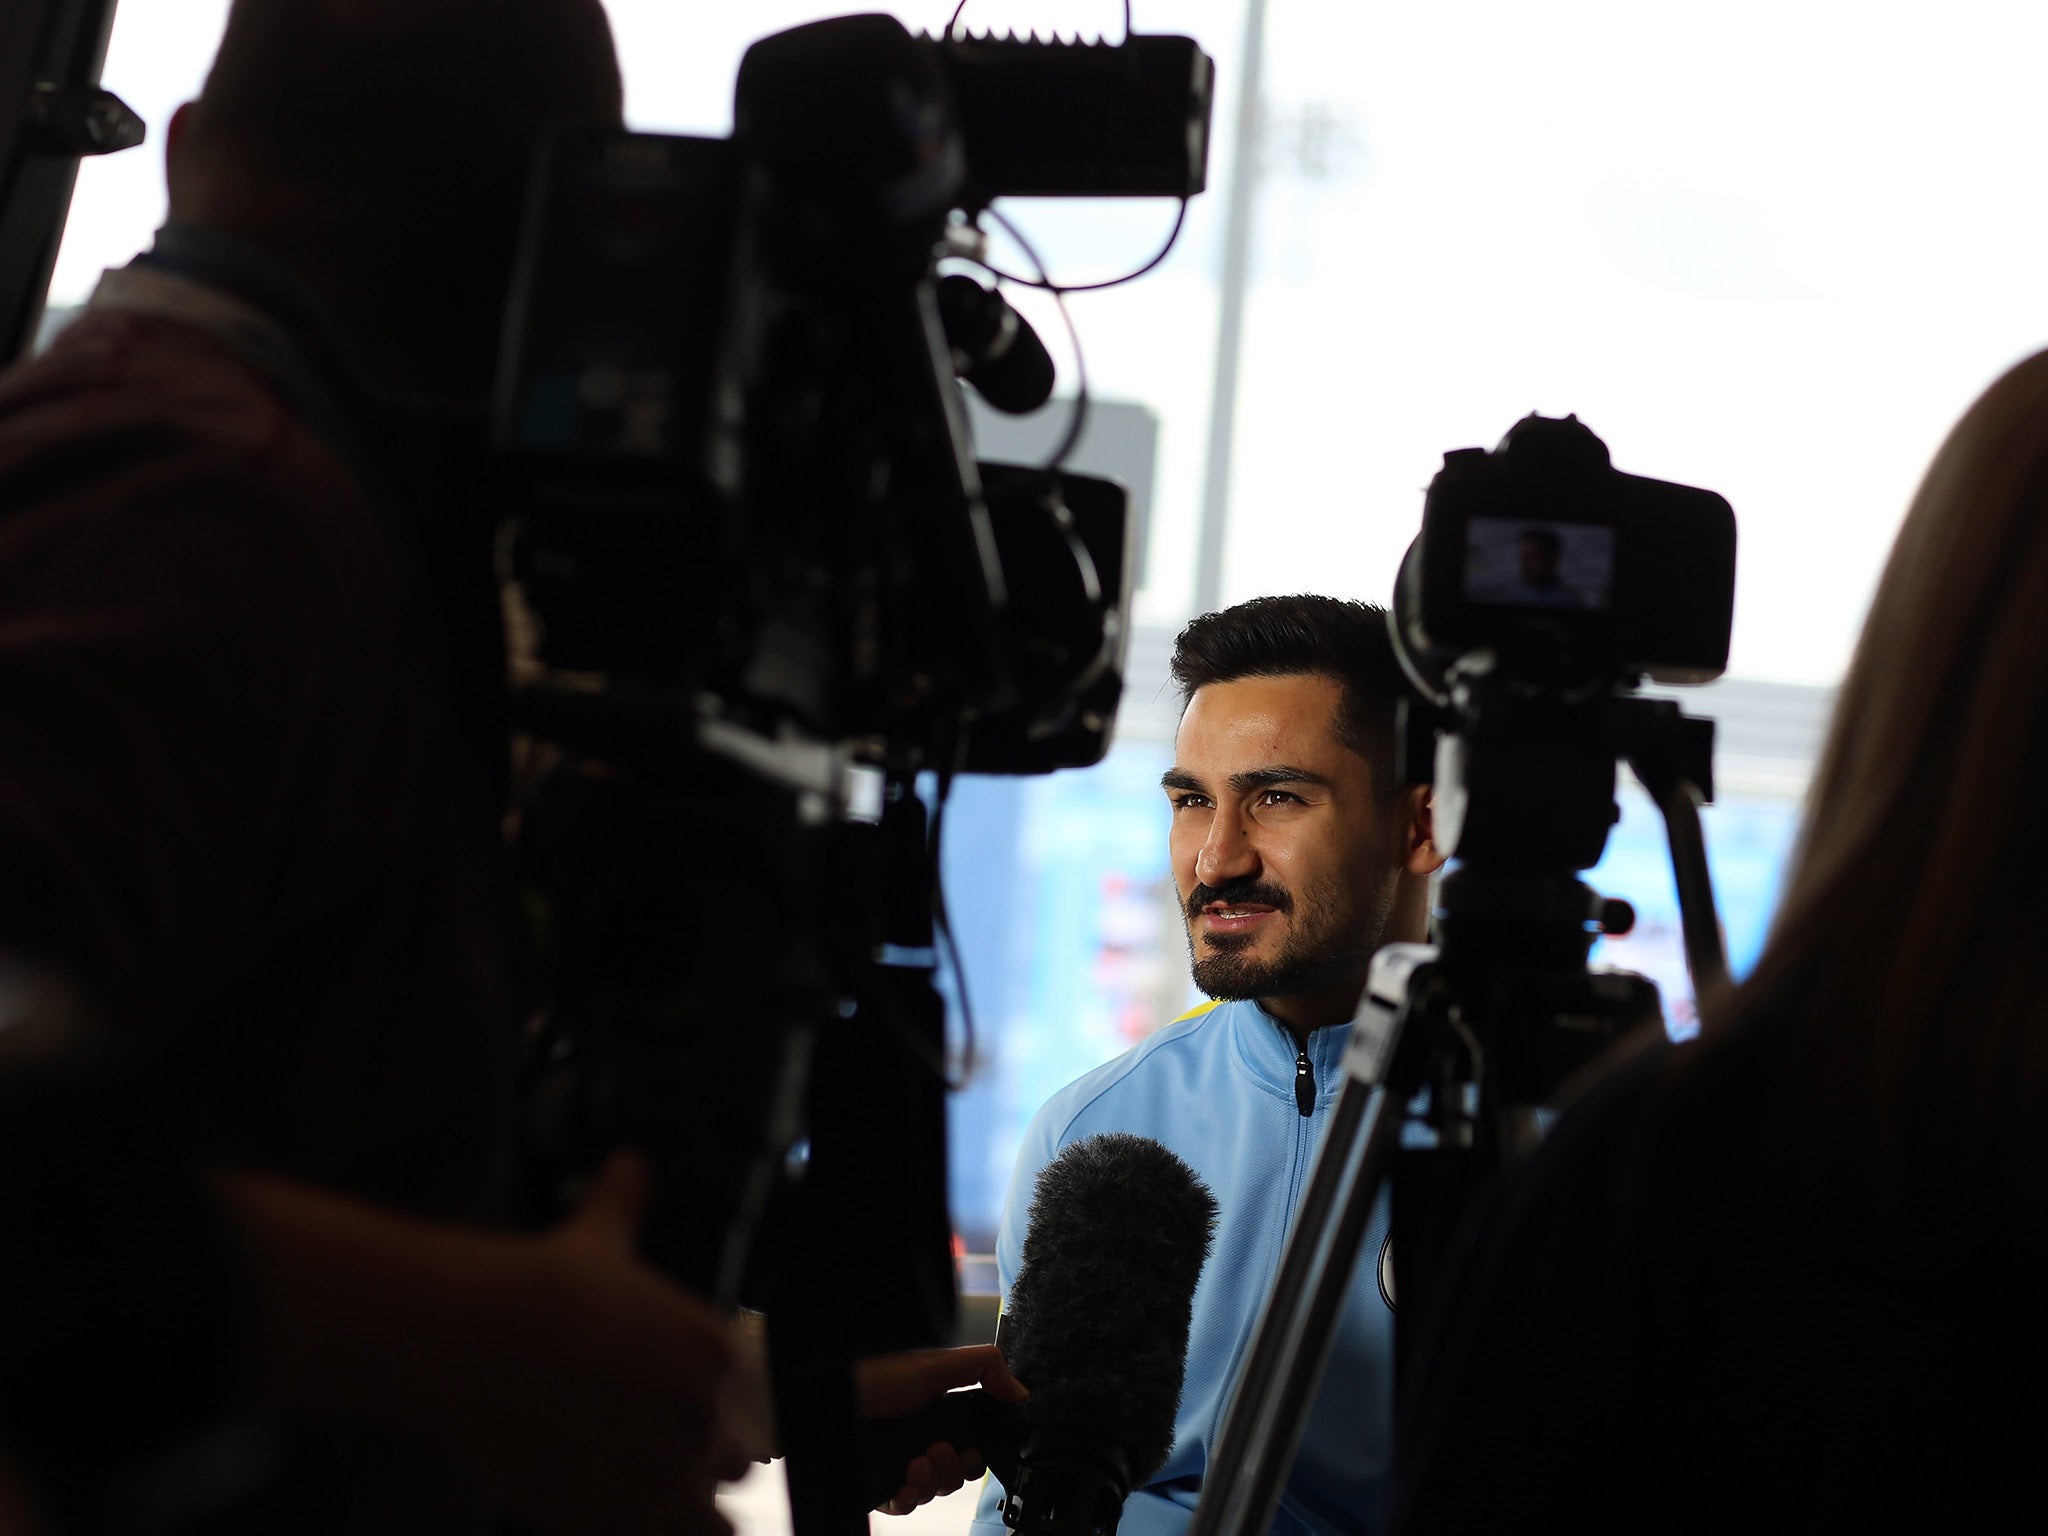 Ilkay Gundogan speaks to the media as a Manchester City player